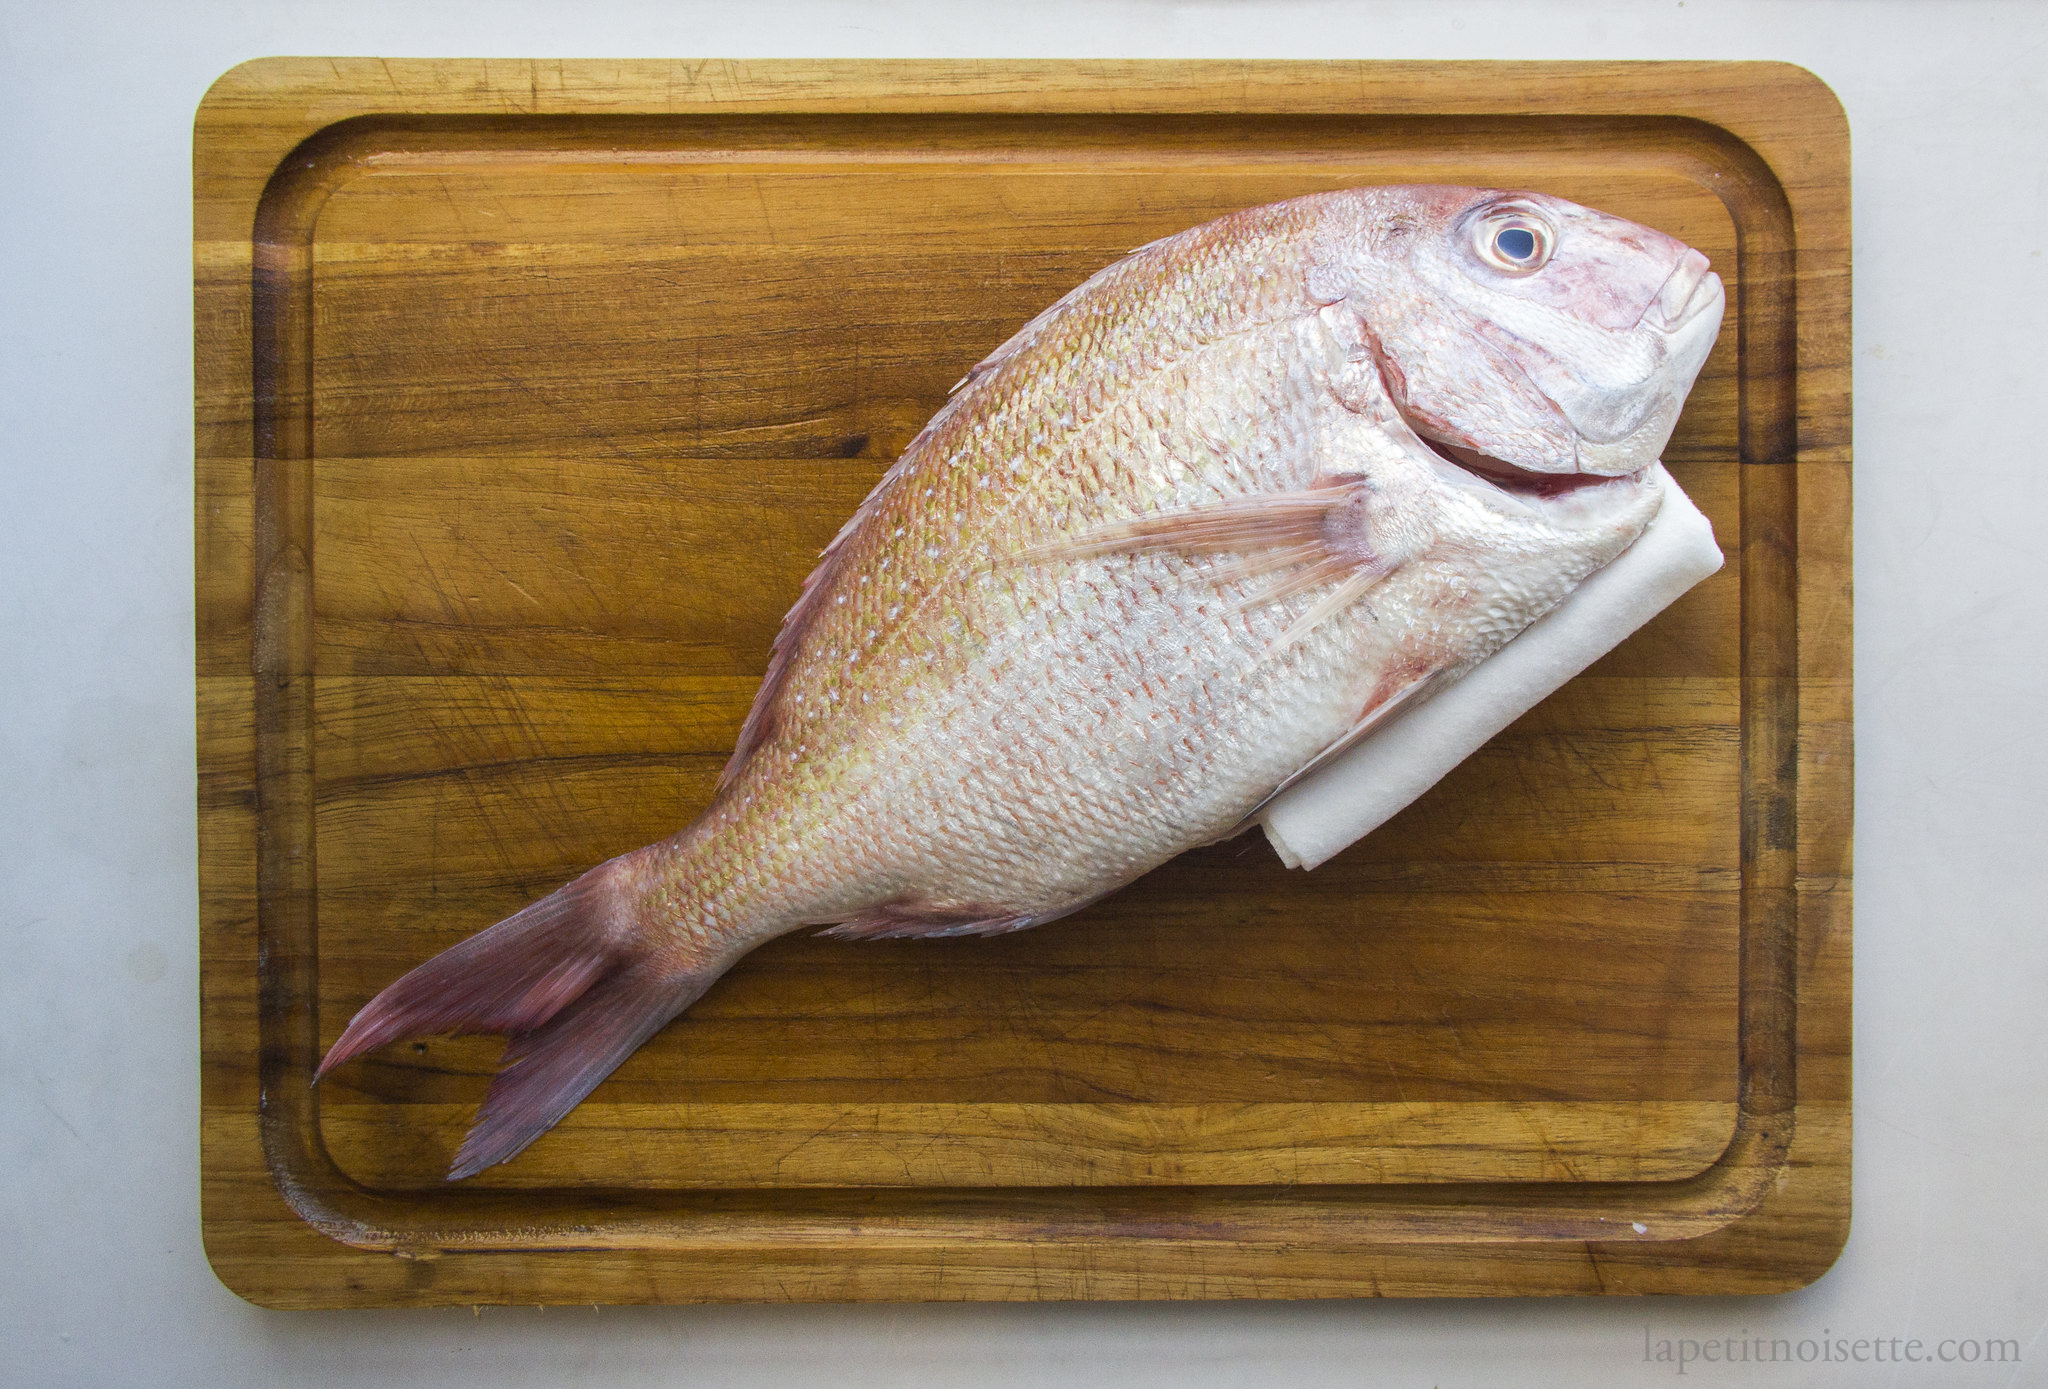 Preparing Japanese Sea Bream to be used in sushi for ageing.